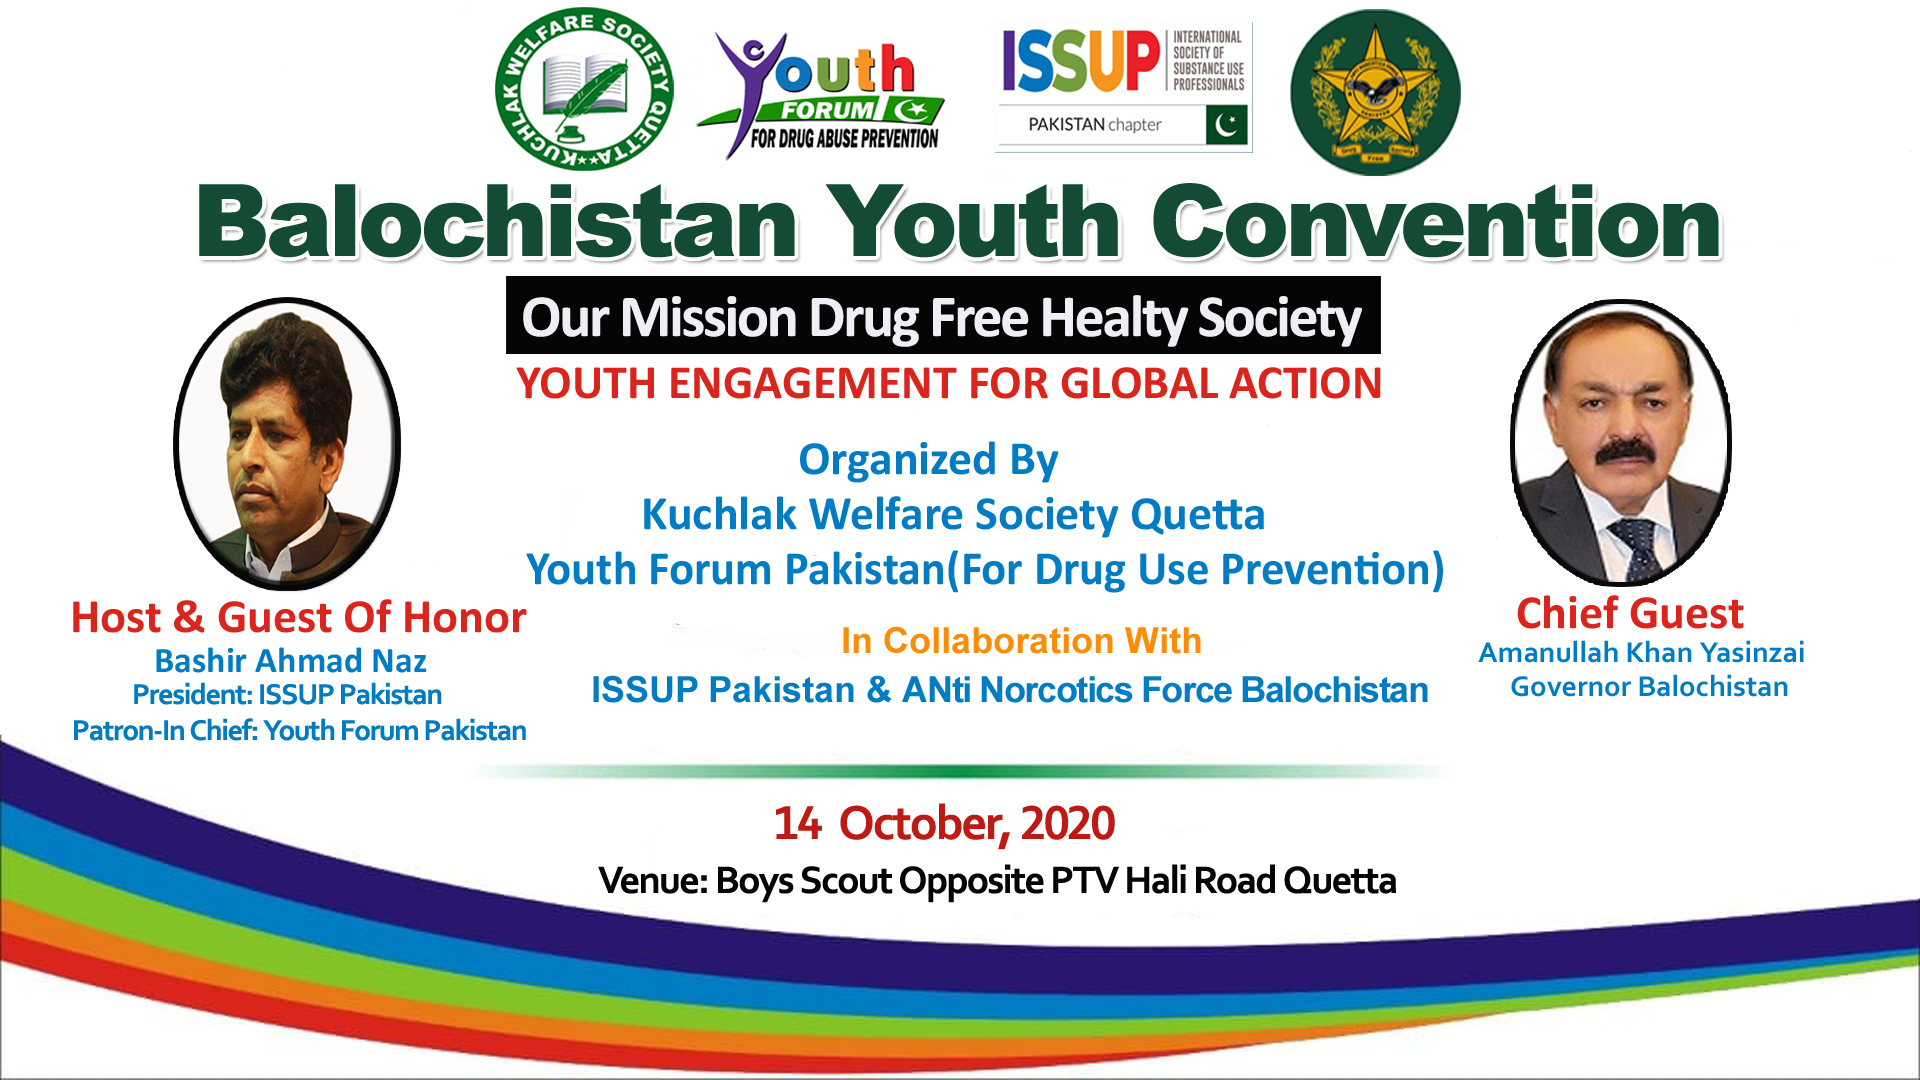 BALOCHISTAN YOUTH CONVENTION 